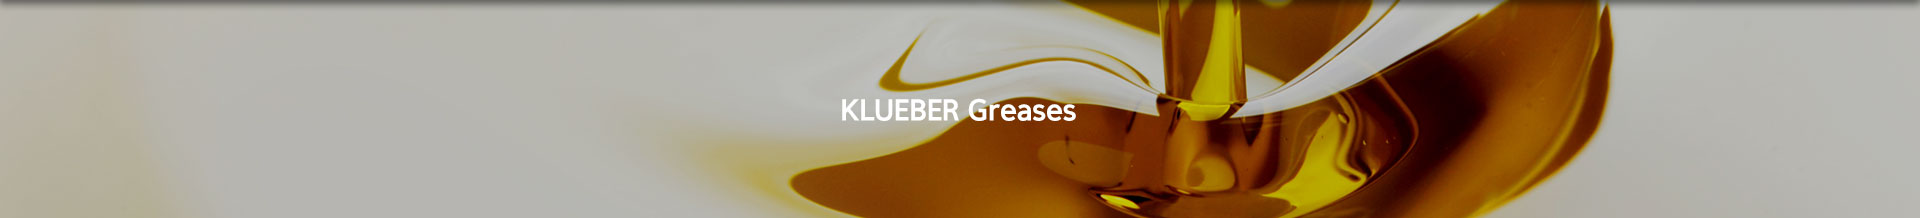 klueber greases